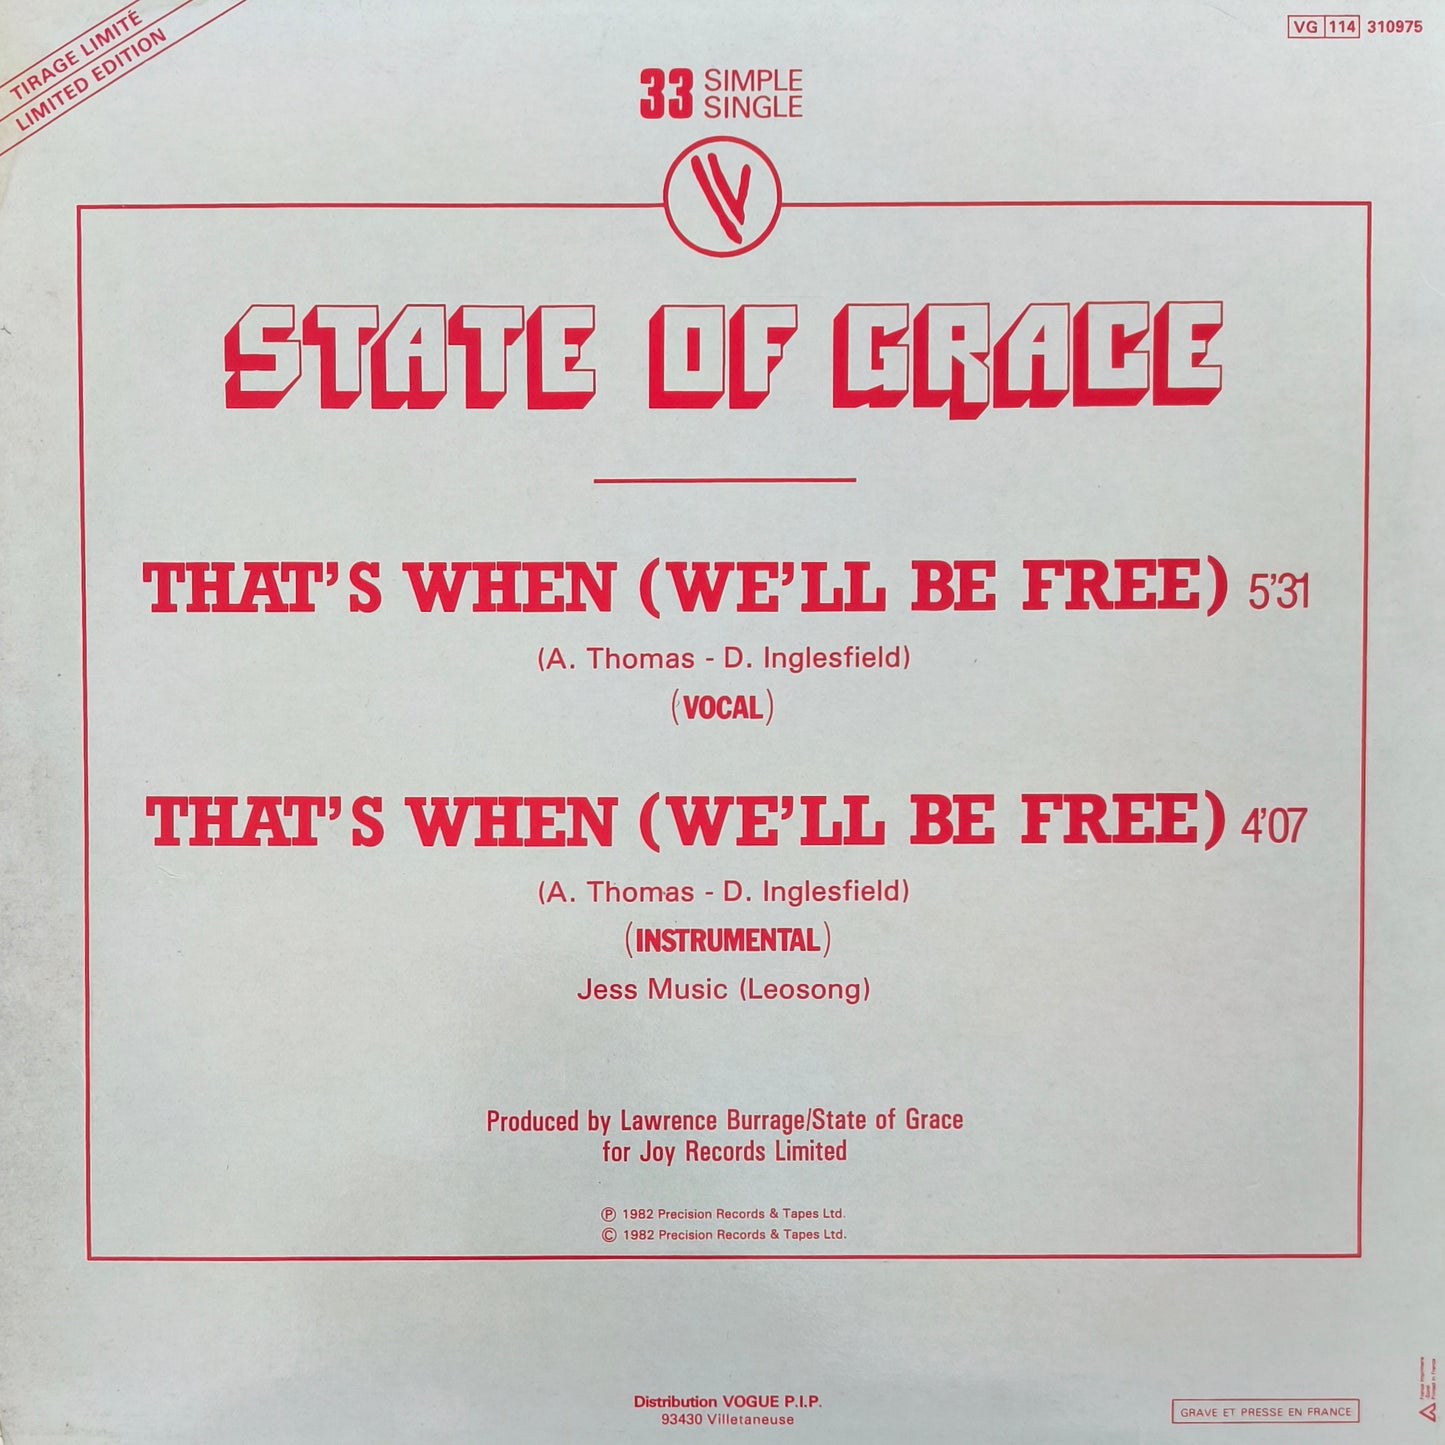 STATE OF GRACE - That's When We'll Be Free (New US Remix)